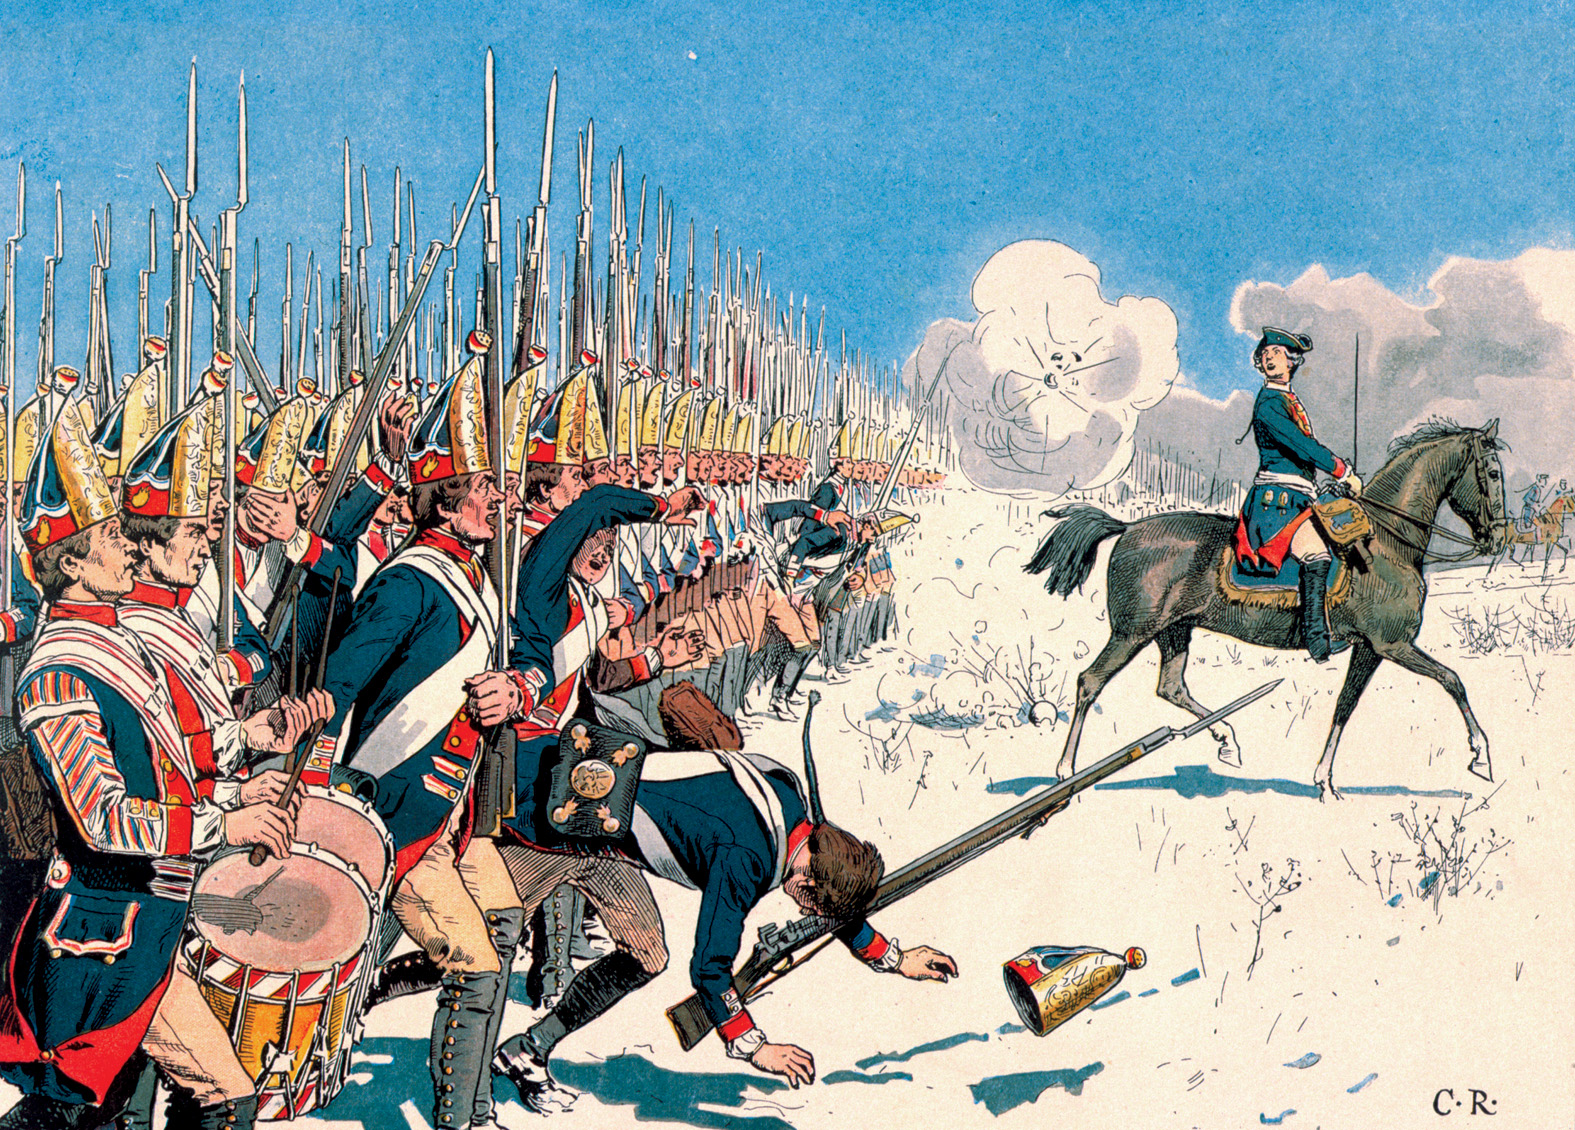 Prussians advance in parade-like formation, impressing both their comrades and their enemies.